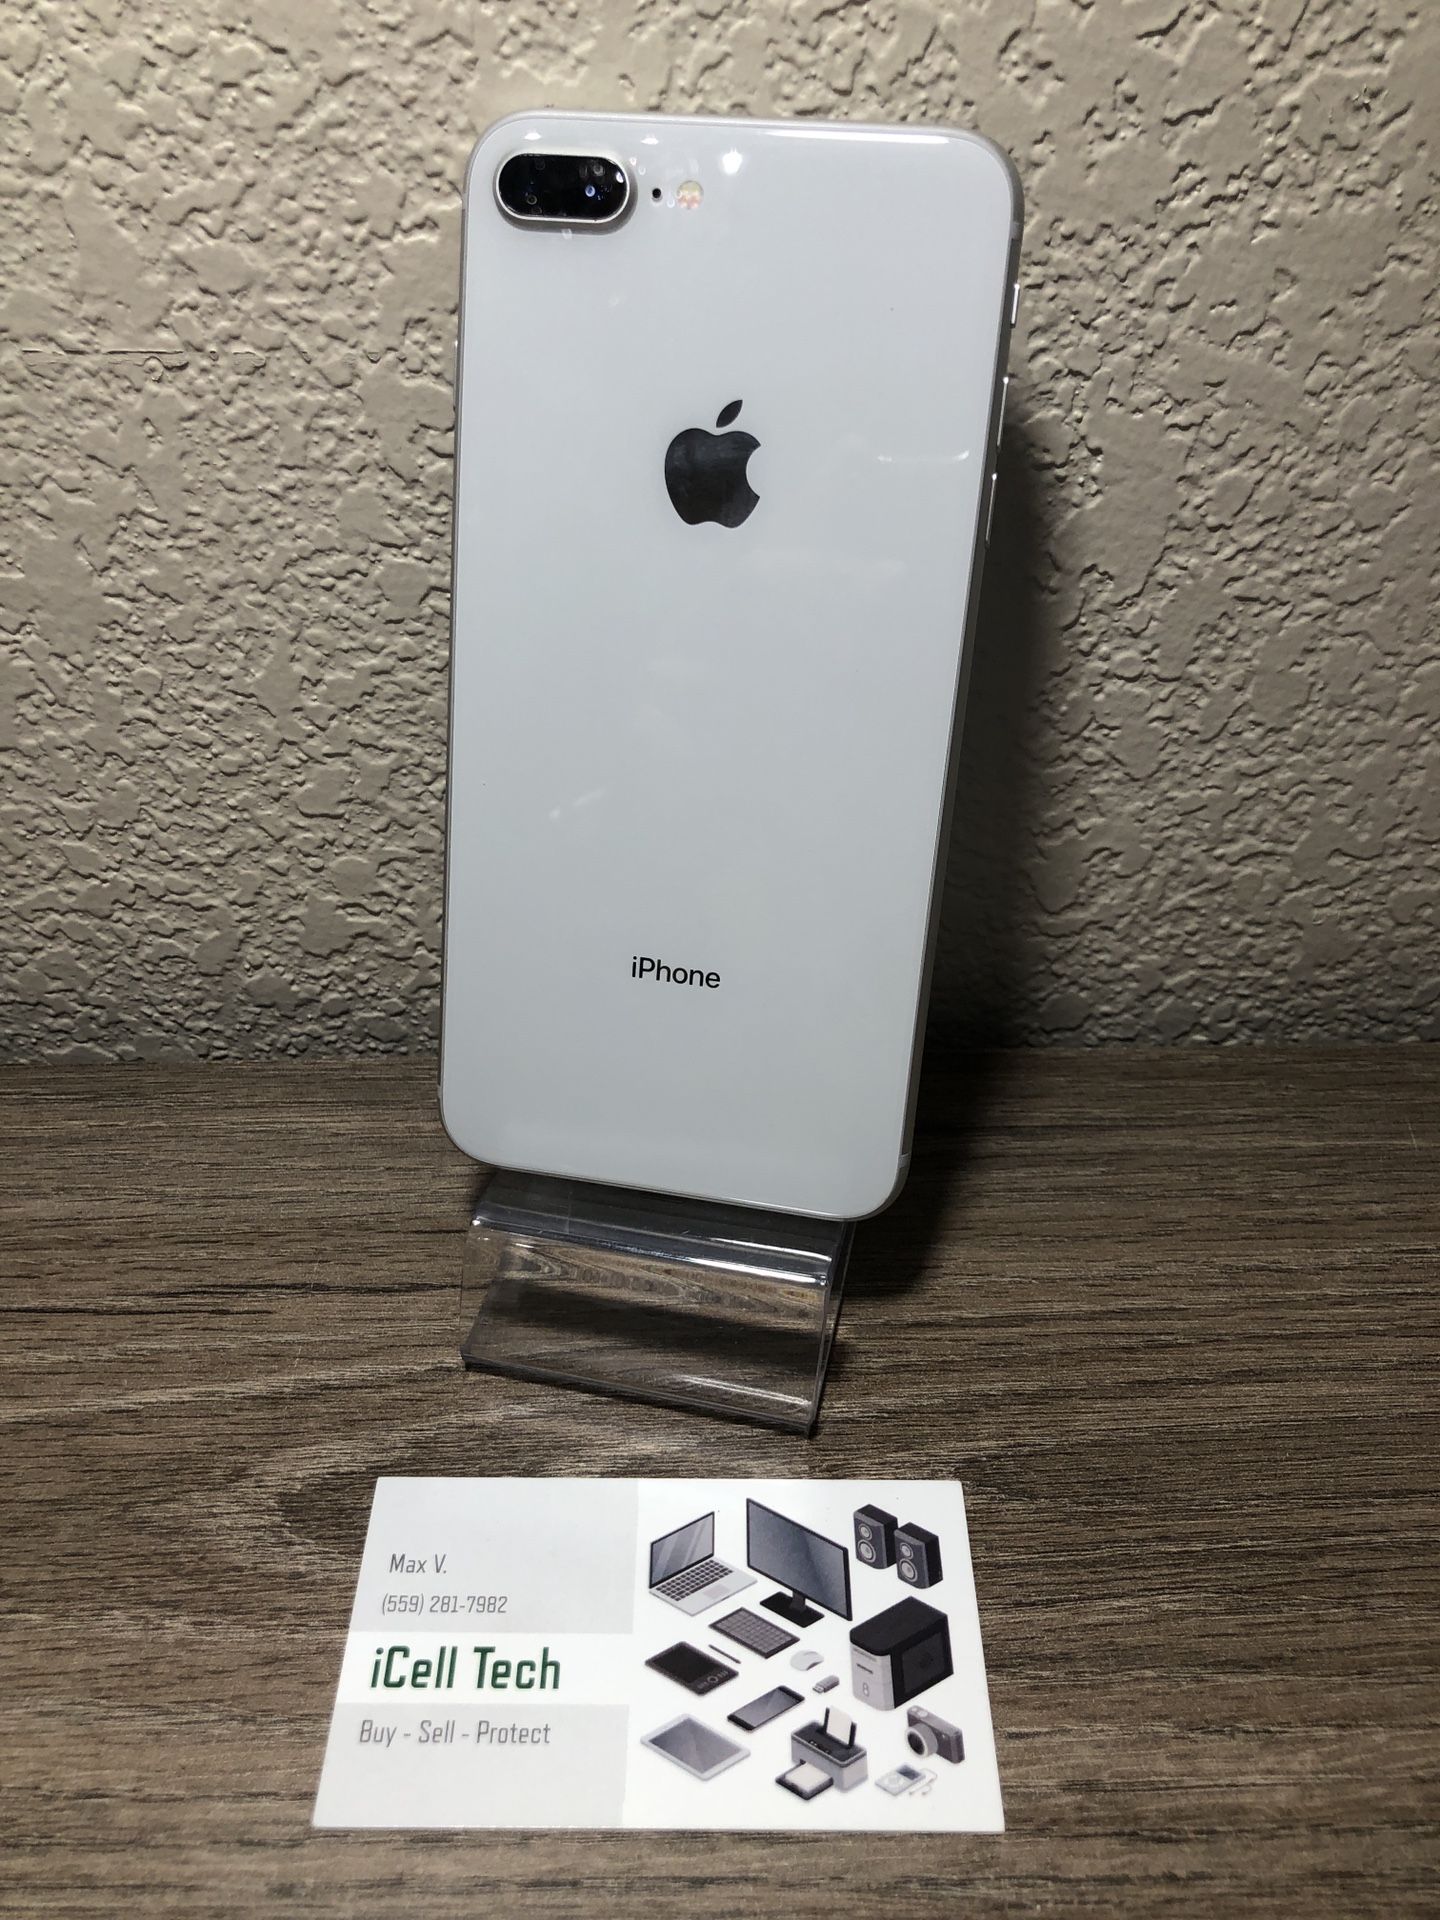 iPhone 8 plus 64gb Unlock for any carrier. IMEI clean, iCloud unlocked.